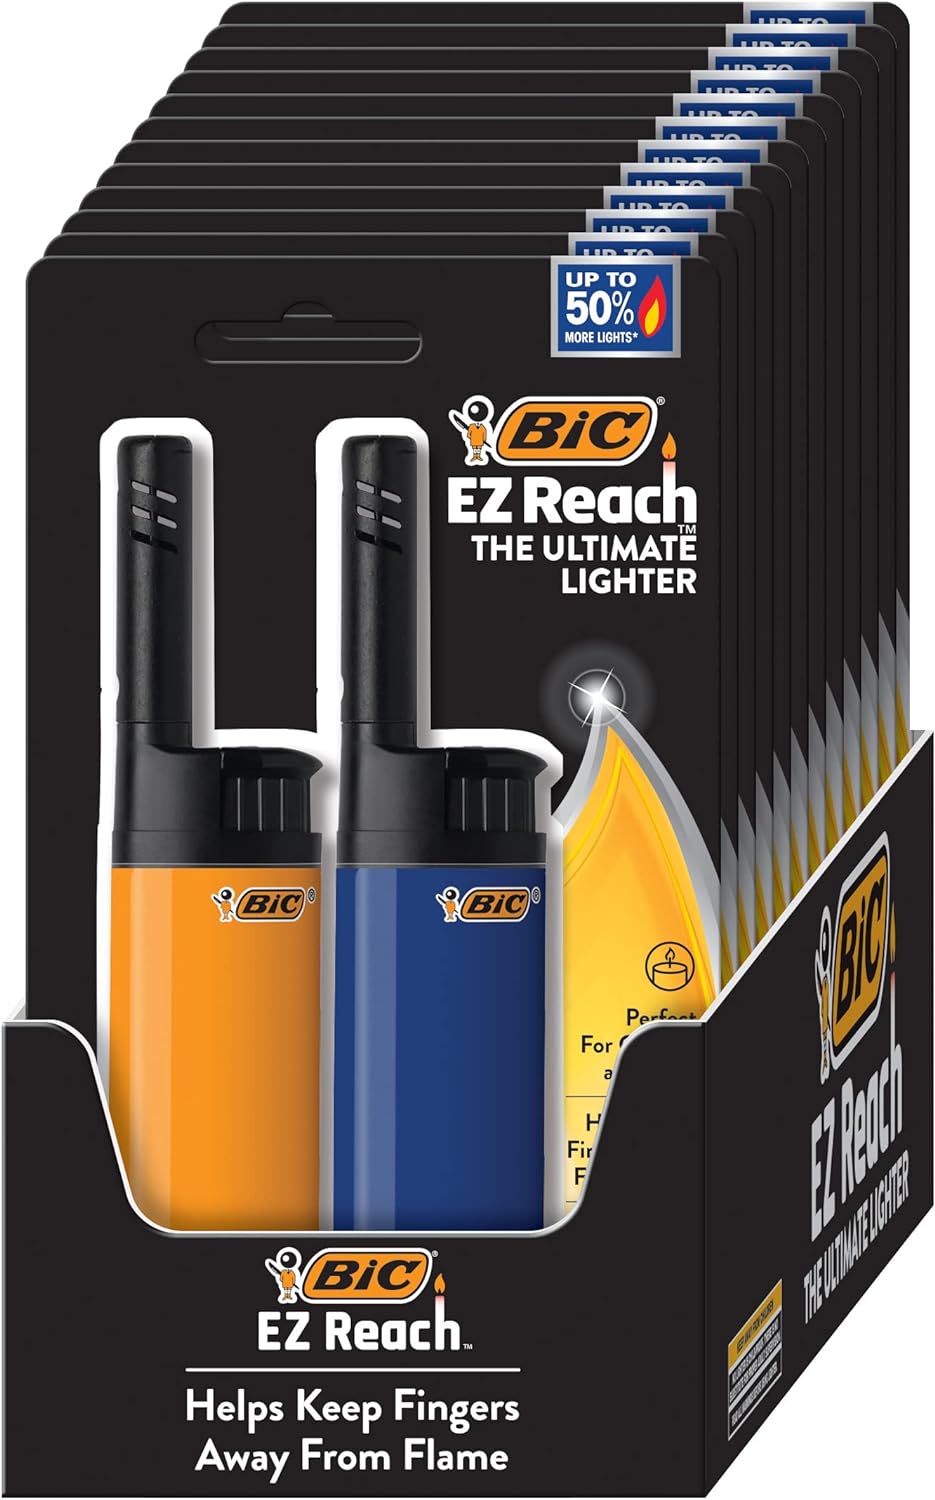 BIC EZ Reach Candle Lighter, The Ultimate Lighter with Extended Wand for Grills and Firepits (1.45-inch), 24 Count Pack Bic Long Lighter (Assortment of Colors May Vary)